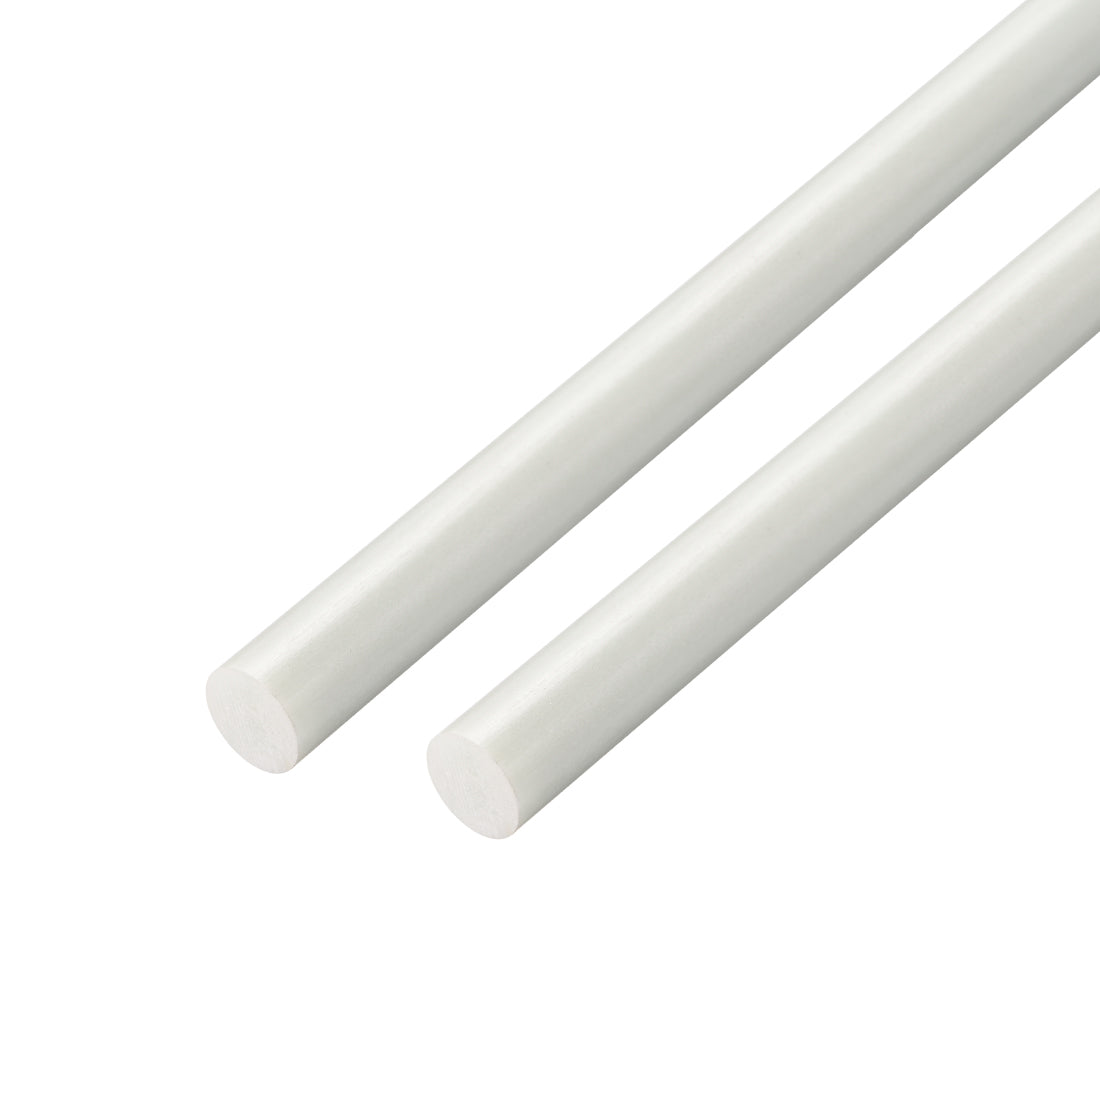 uxcell Uxcell FRP Fiberglass Round Rod,7mm Dia 50cm Long,White Engineering Round Rods 2pcs